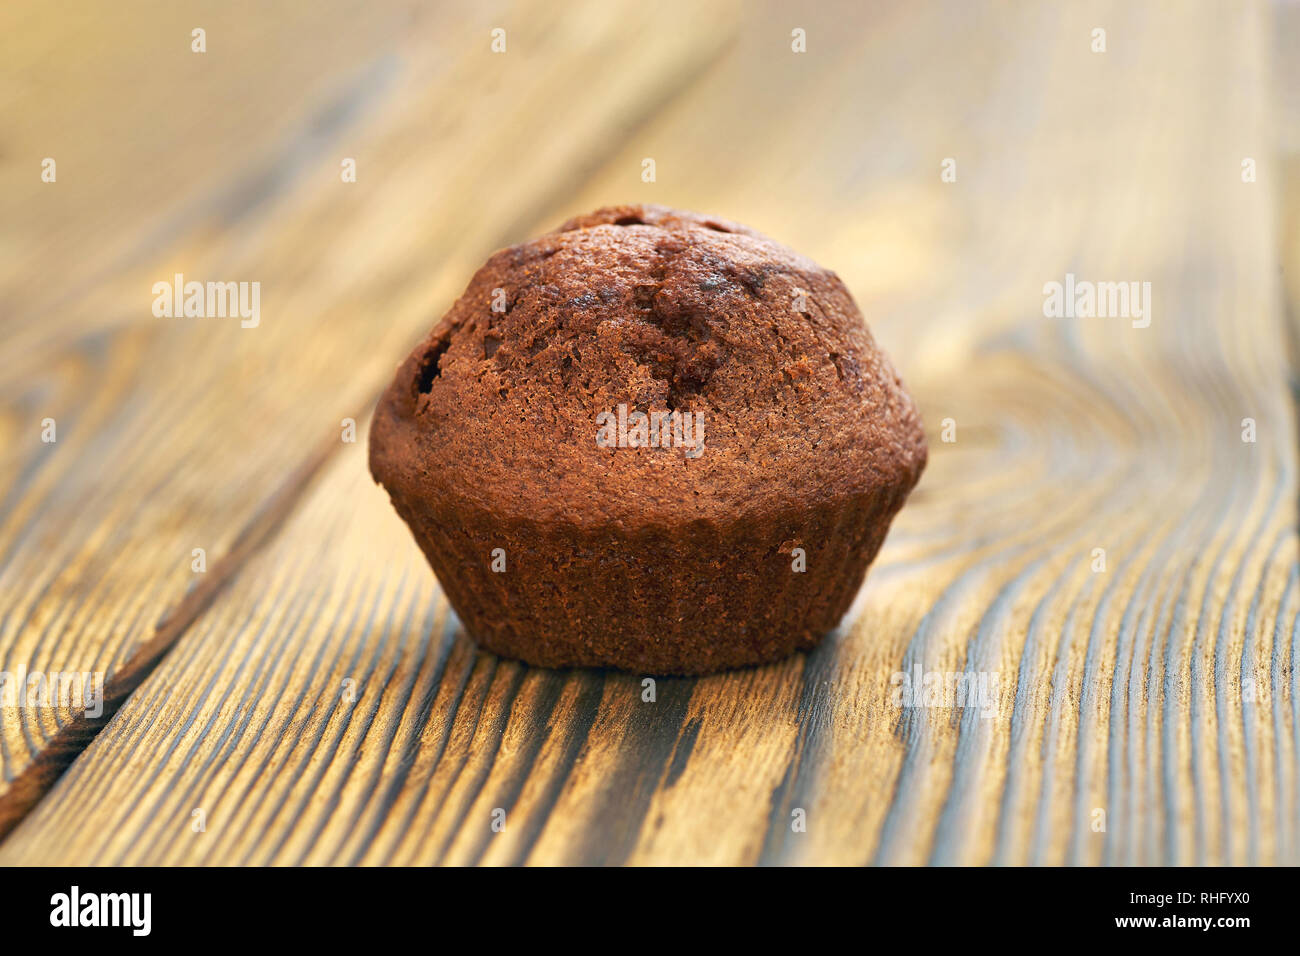 Chocolate muffins with edible eyes in paper holders Stock Photo - Alamy